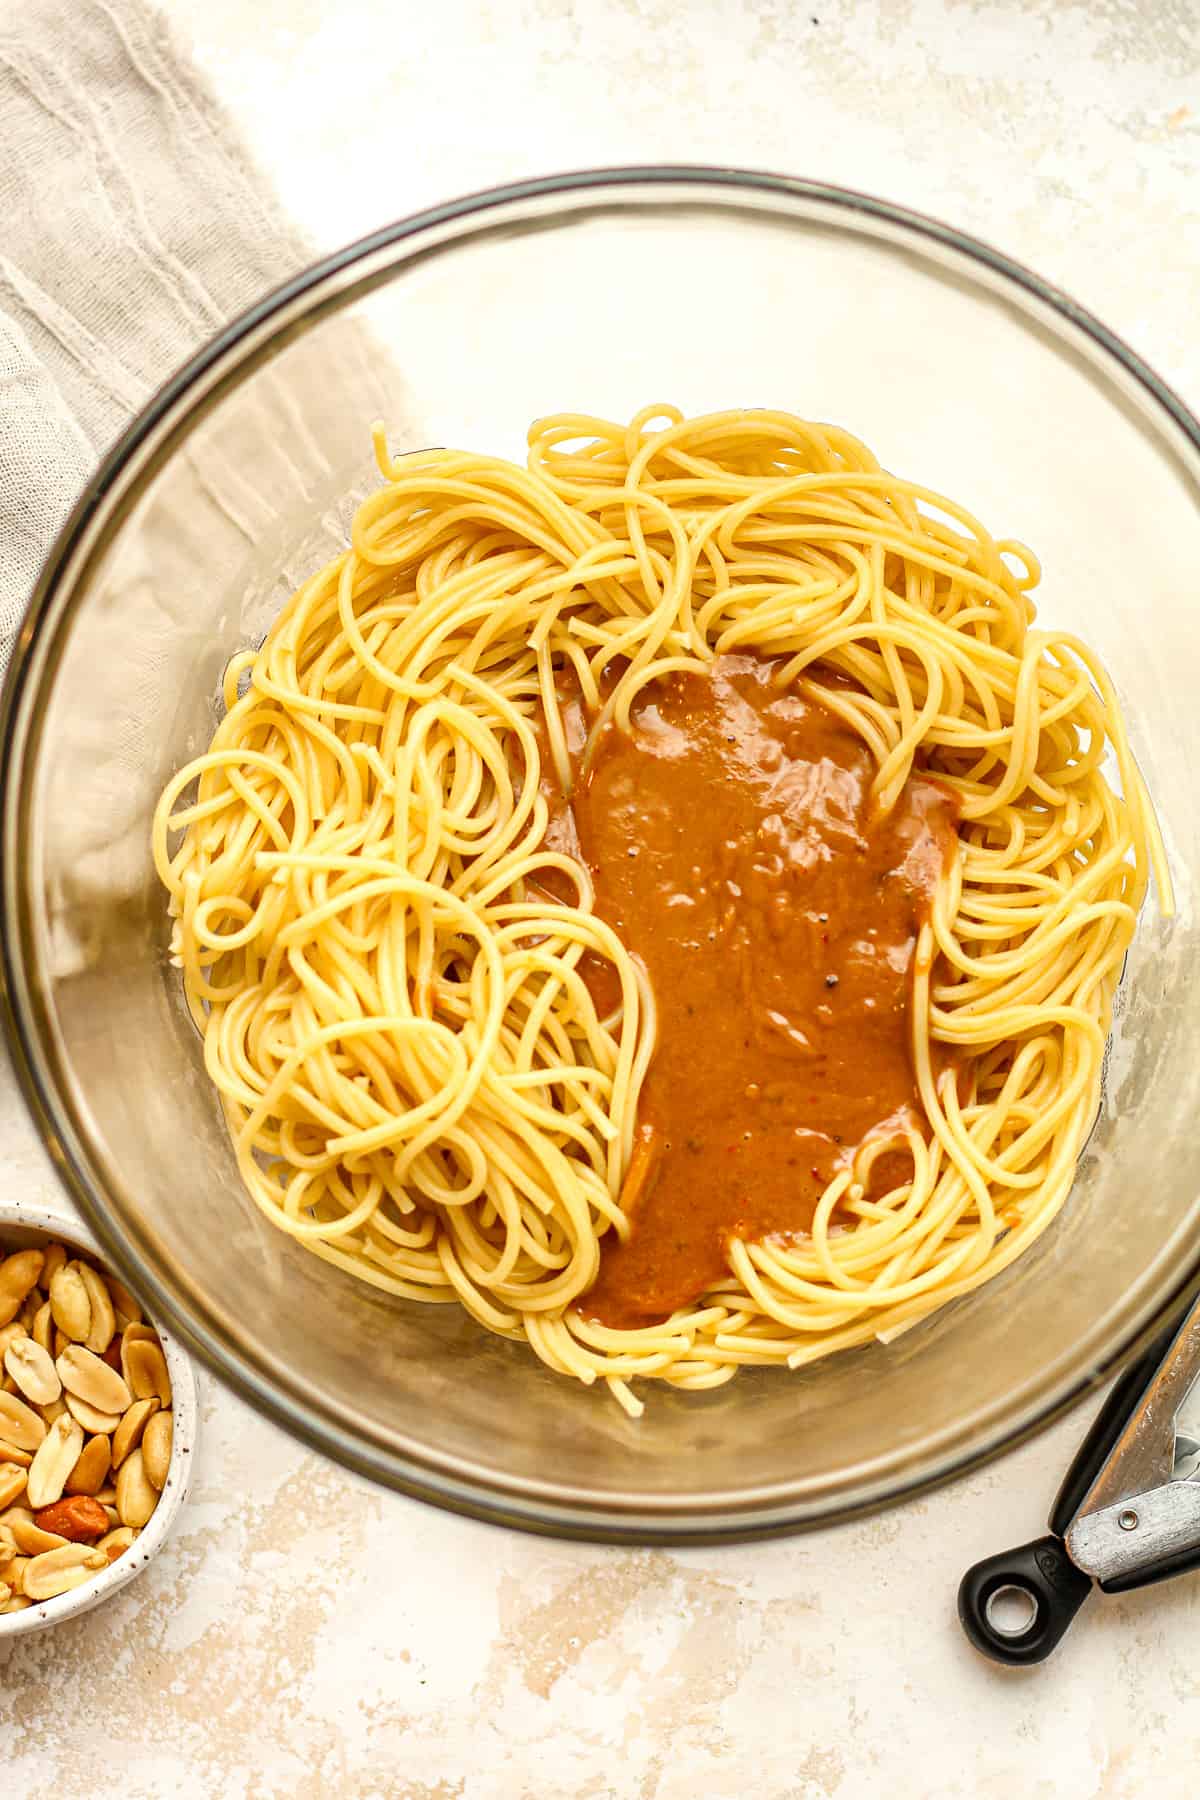 A bowl of spaghetti noodles and peanut sauce.